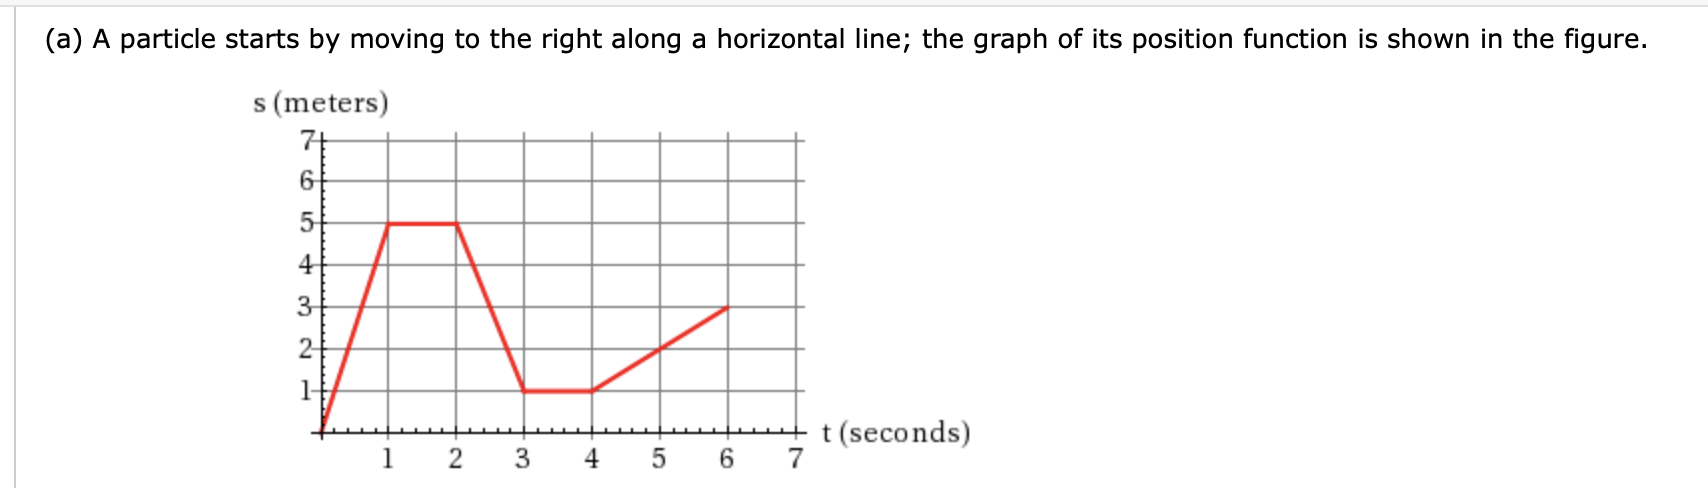 (a) A particle starts by moving to the right along a horizontal line; the graph of its position function is shown in the figure.
s (meters)
4
3
2-
t(seconds)
-N
CO
-LO
